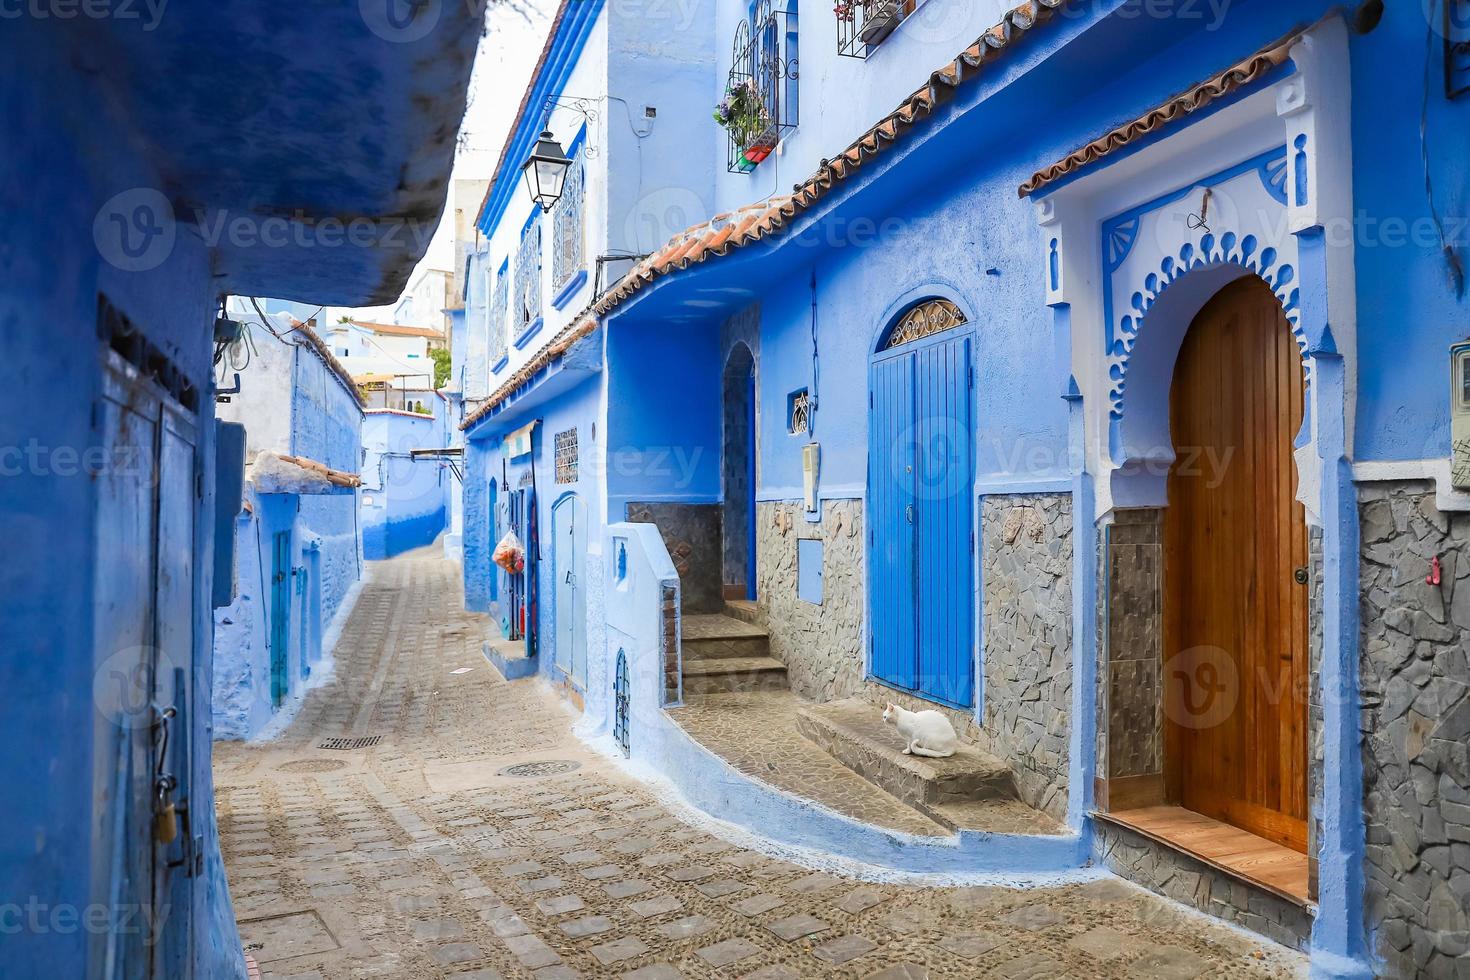 Street in Chefchaouen, Morocco photo